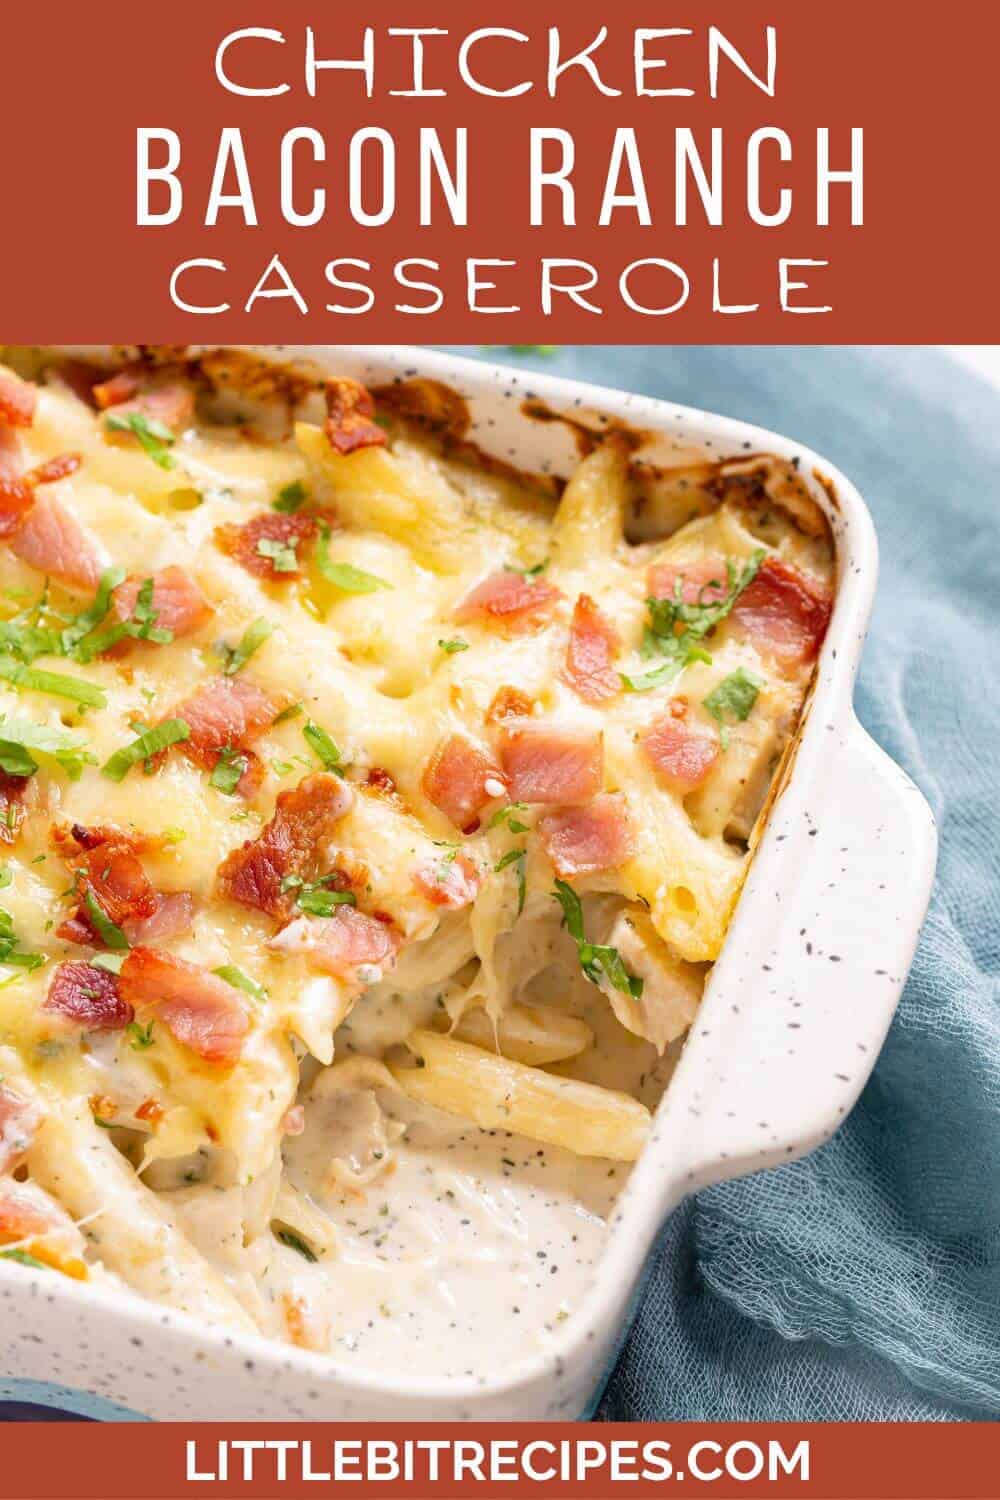 Chicken bacon ranch casserole with text.